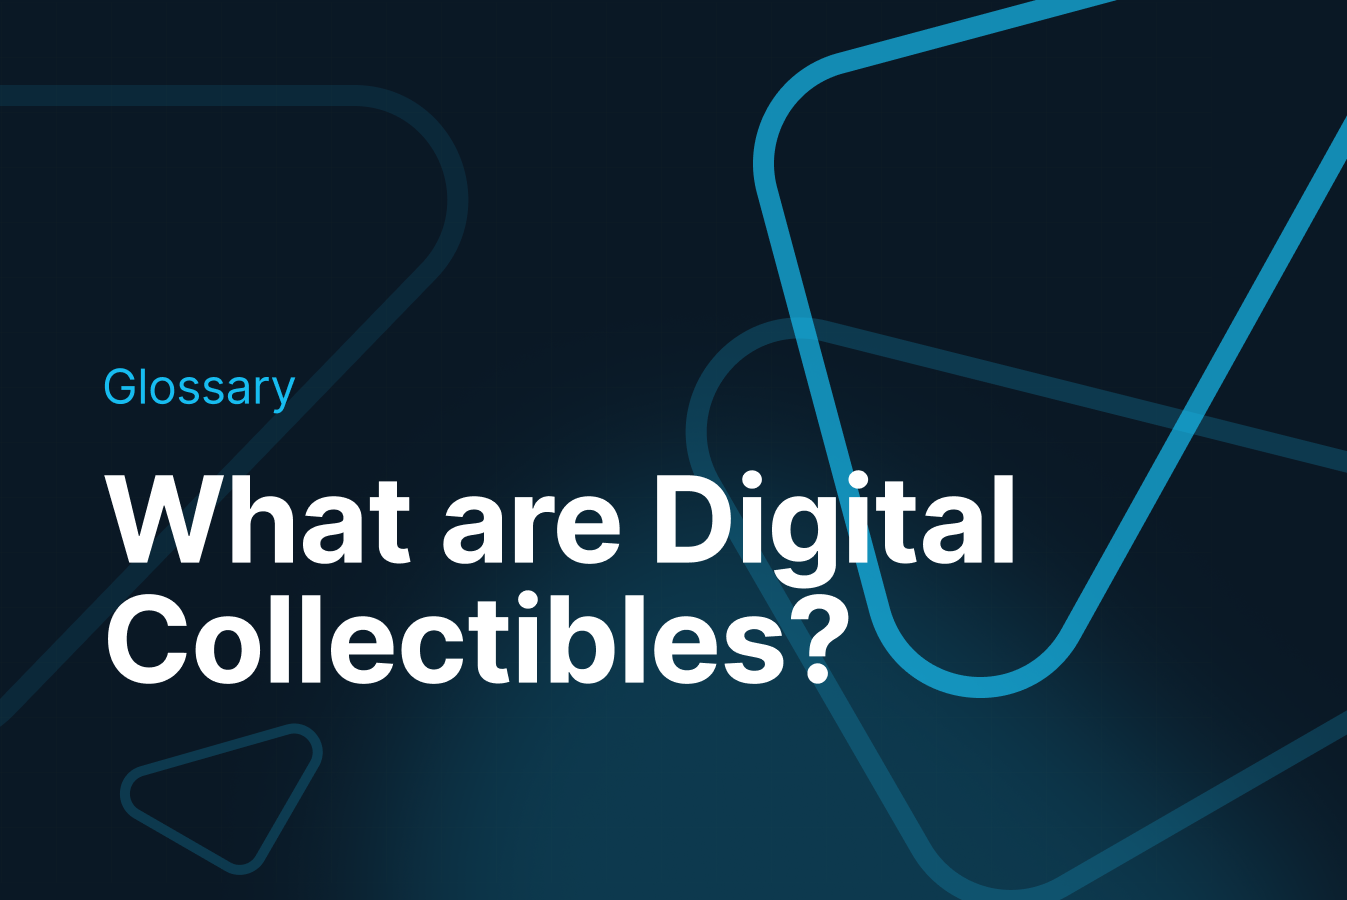 What are digital collectibles